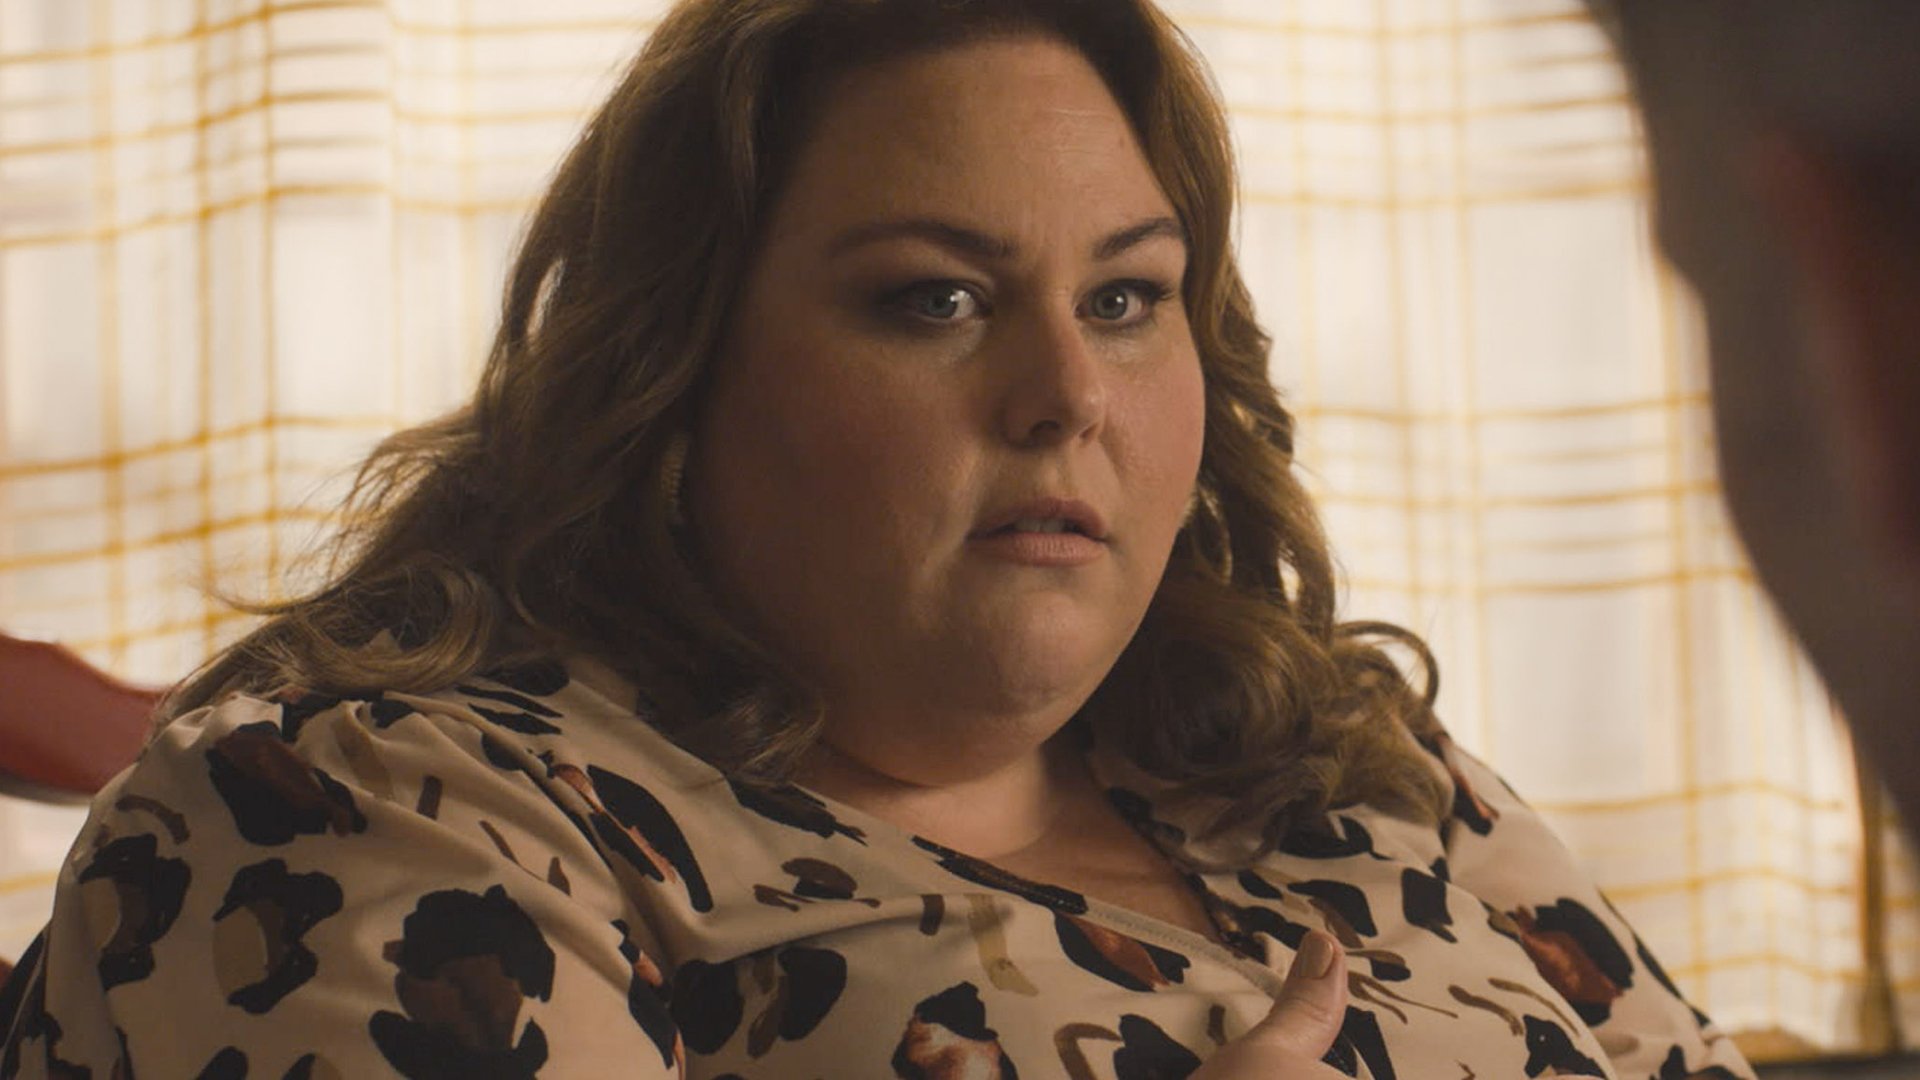 Chrissy Metz as Kate Pearson looking at Justin Hartley as Kevin Pearson in the ‘This Is Us’ Season 5 premiere, one season before the 'This Is Us' ending